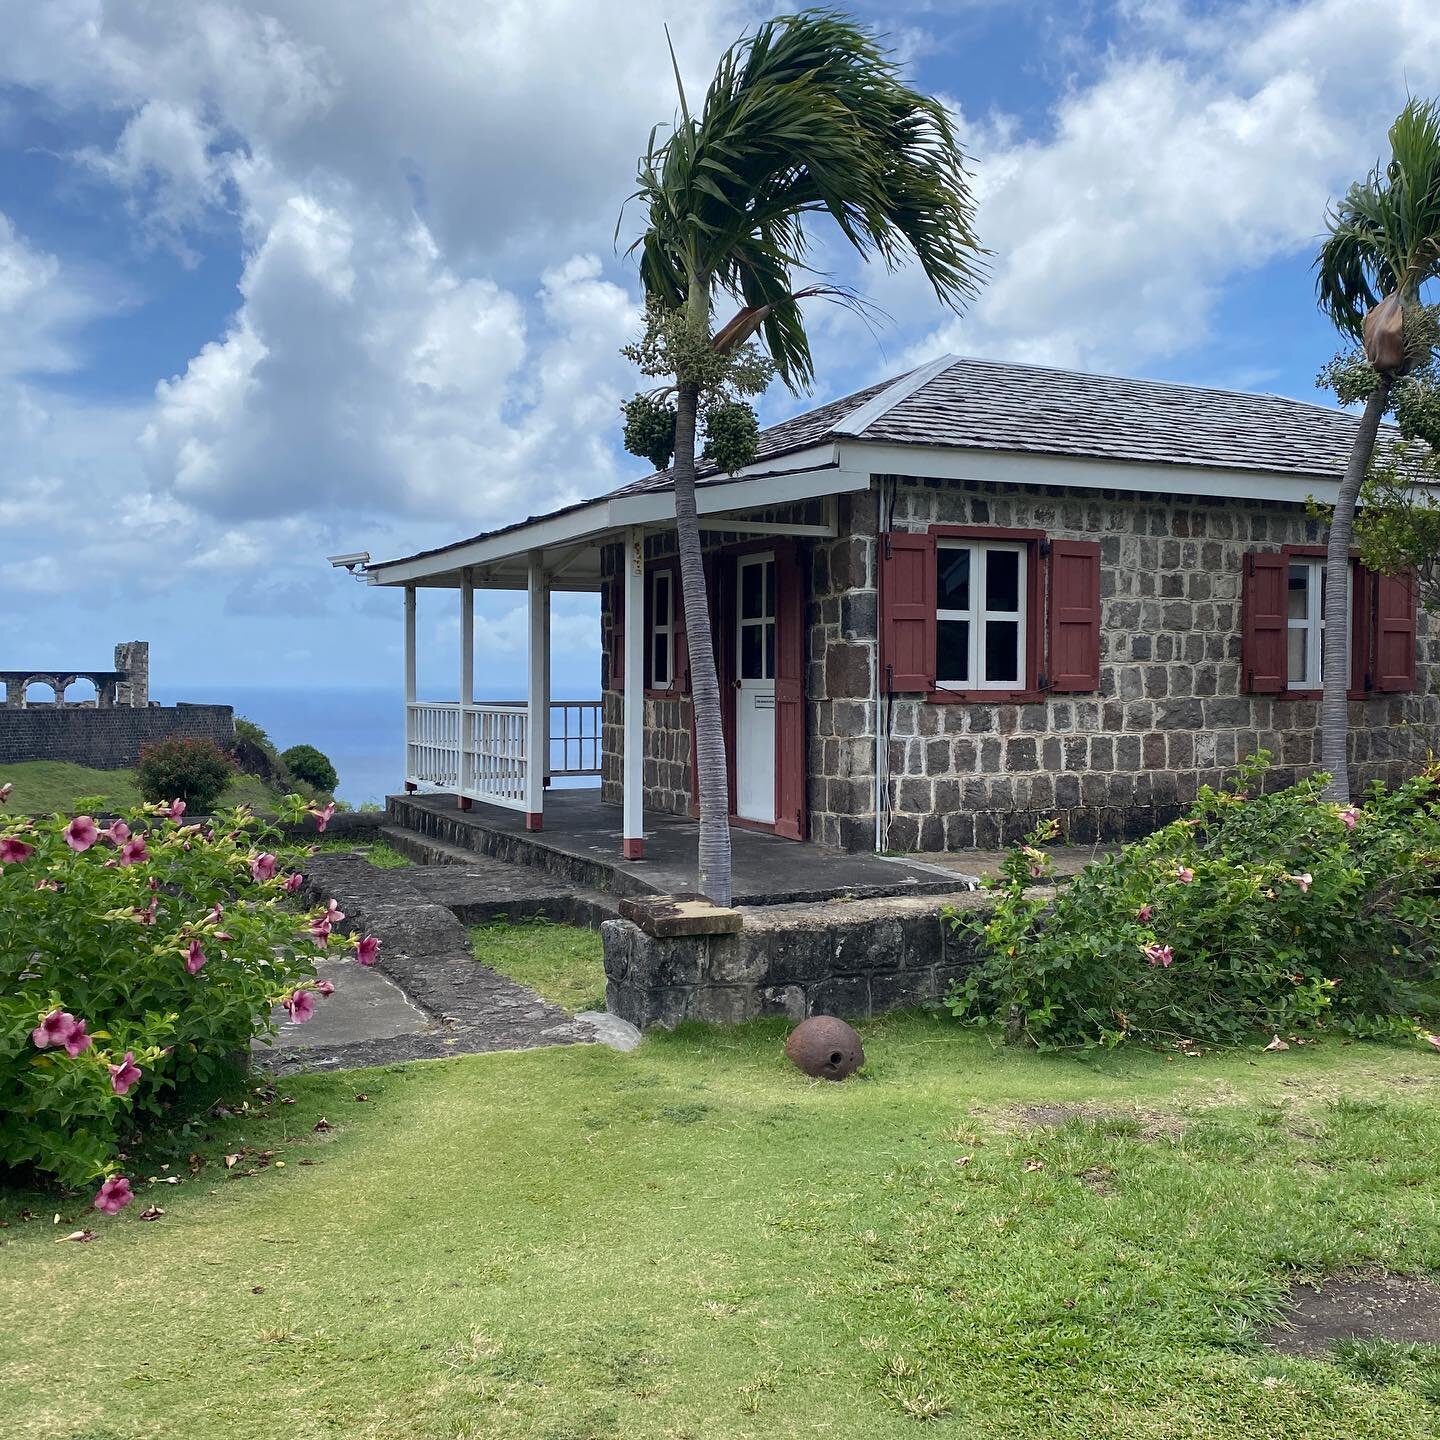 Off Island Explorations: The details of &ldquo;place making.&rdquo;
The term VERNACULAR speaks to a language or expression that is native to a specific place.
What is striking to me is the vernacular of colonial architecture throughout the Caribbean 